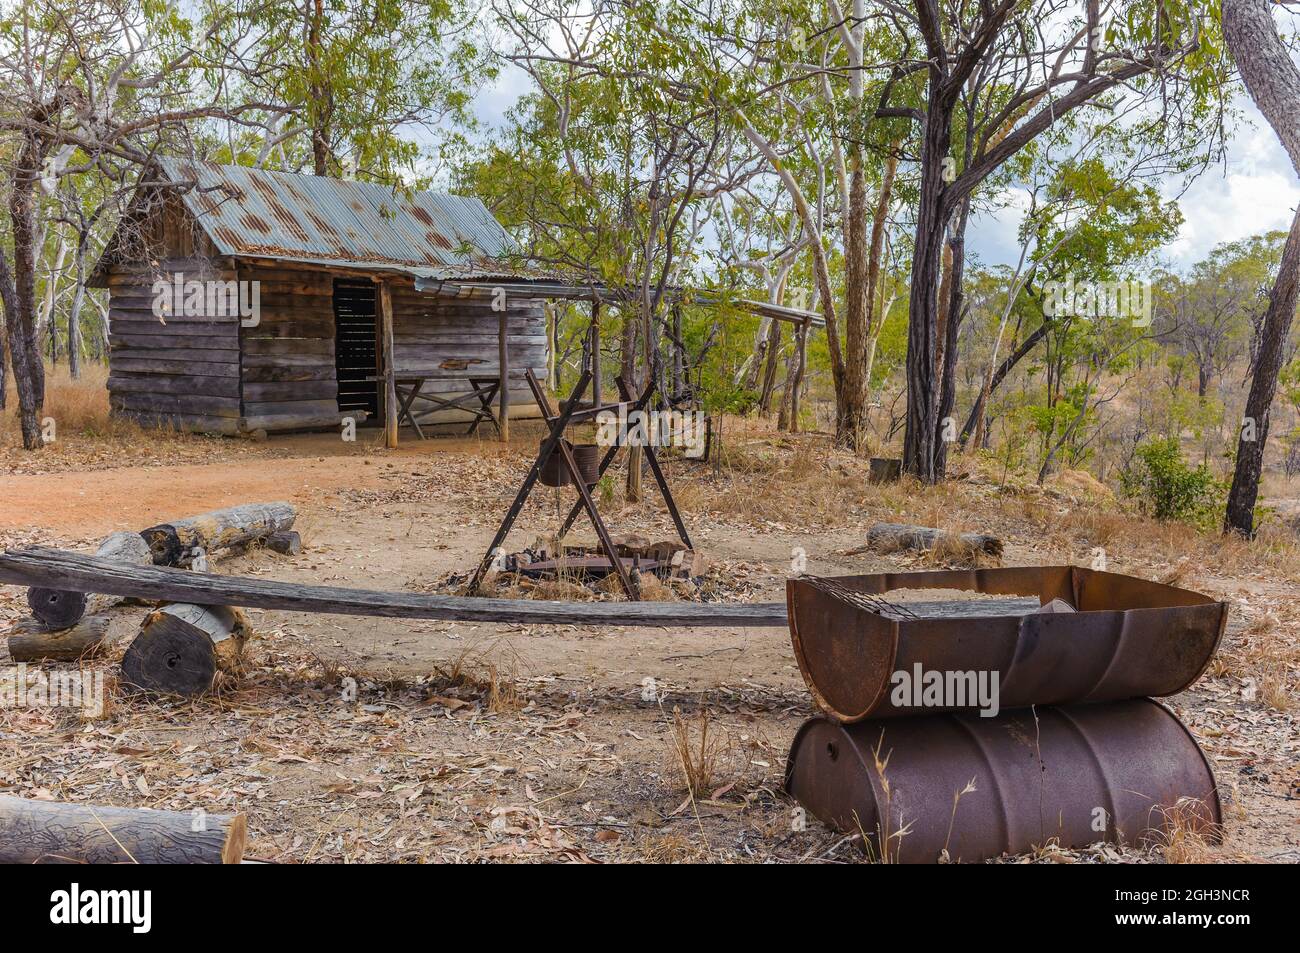 A replica old early pioneer log cabin and traditional outback, outdoor kitchen at Undara, North-west Queensland in Australia. Stock Photo